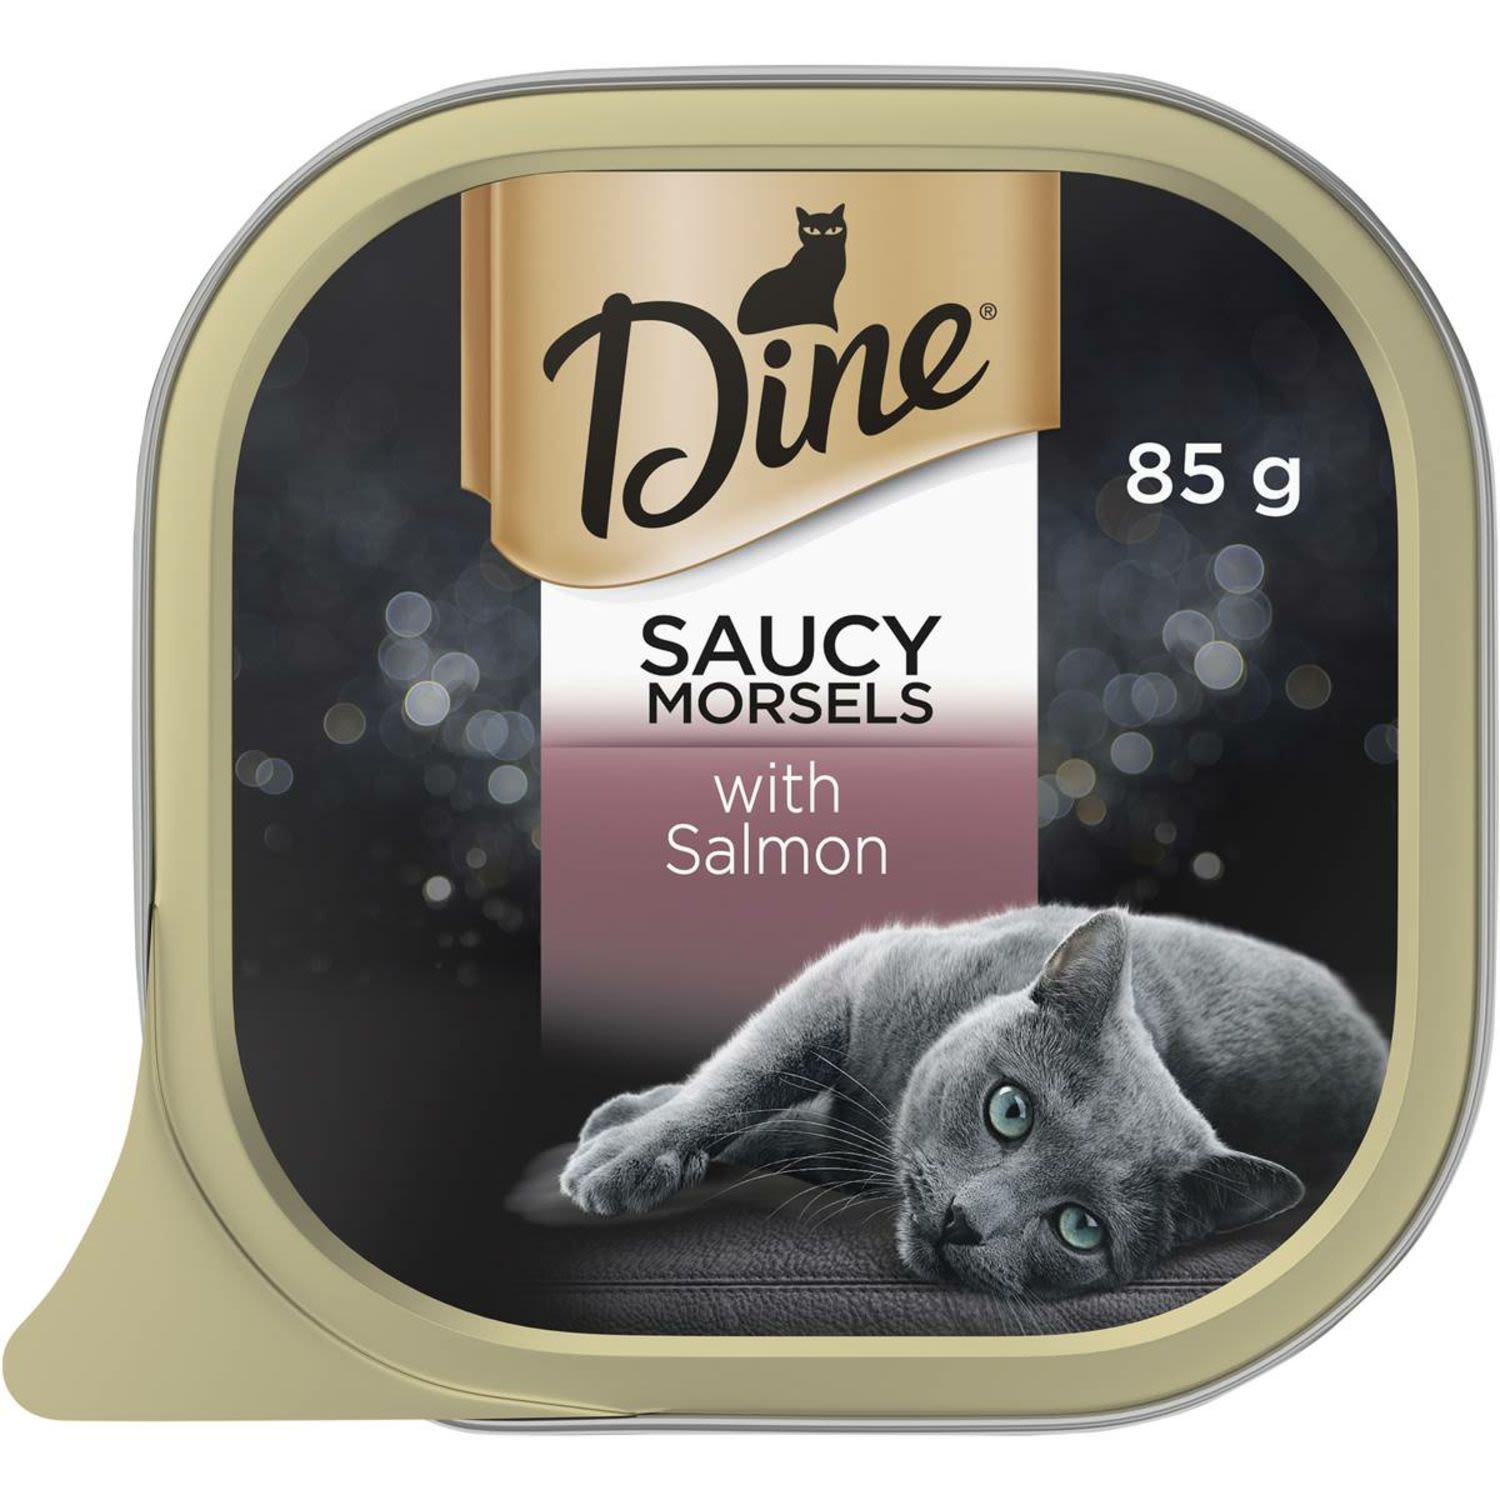 Dine Saucy Morsels With Salmon Wet Cat Food Tray, 85 Gram